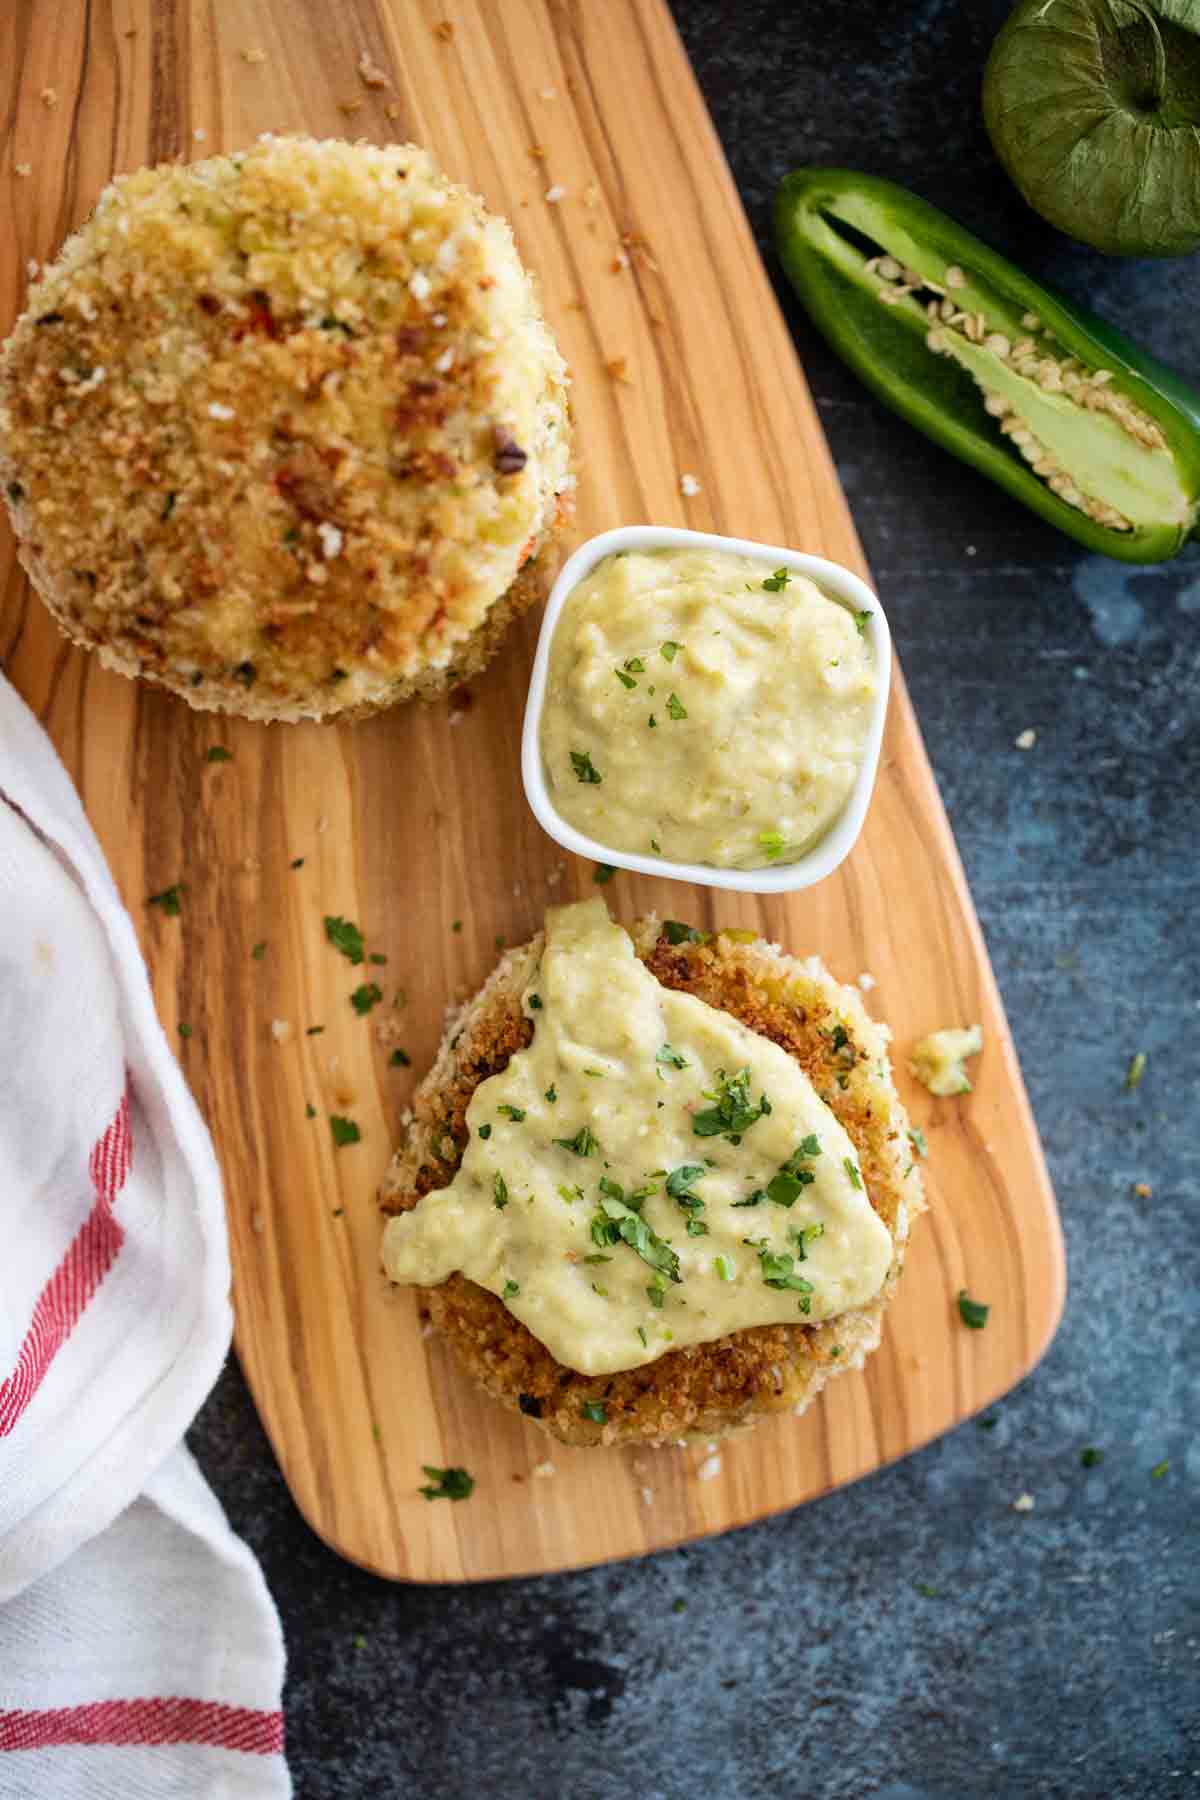 Green chile crab cake topped with tomatillo salsa on a wooden board.